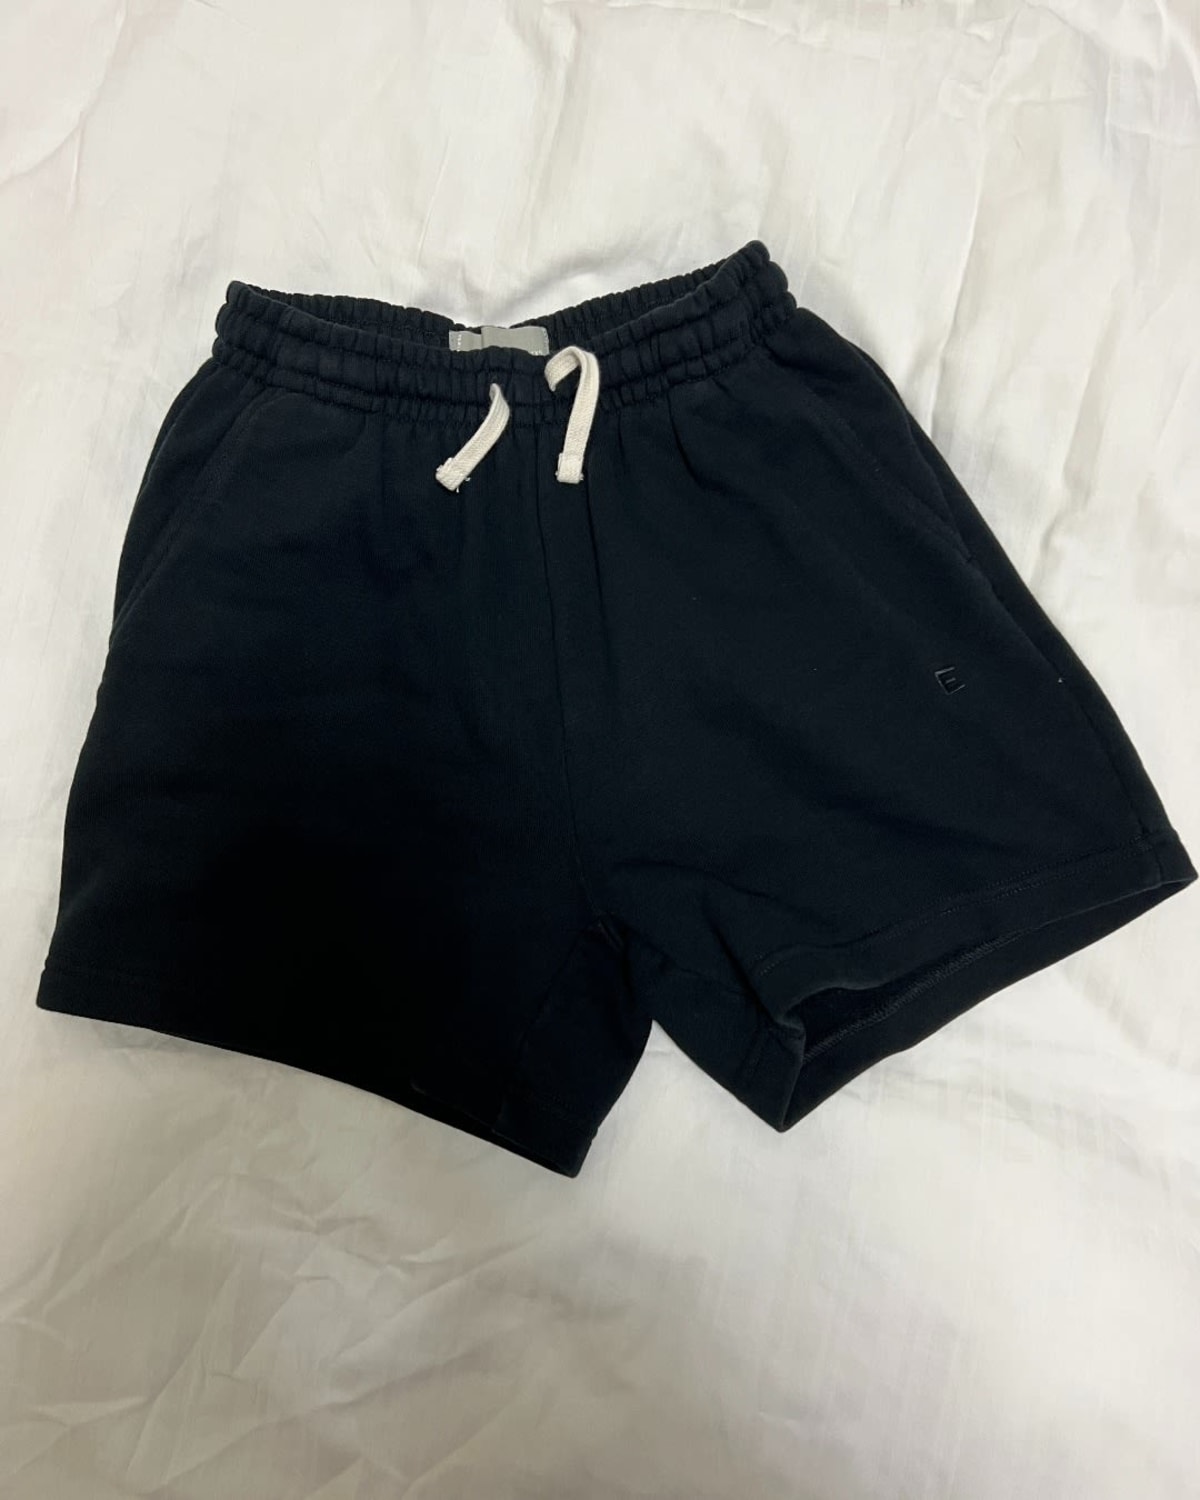 The comfiest sweat shorts from Everlane! Saved on shipping through Vpost!